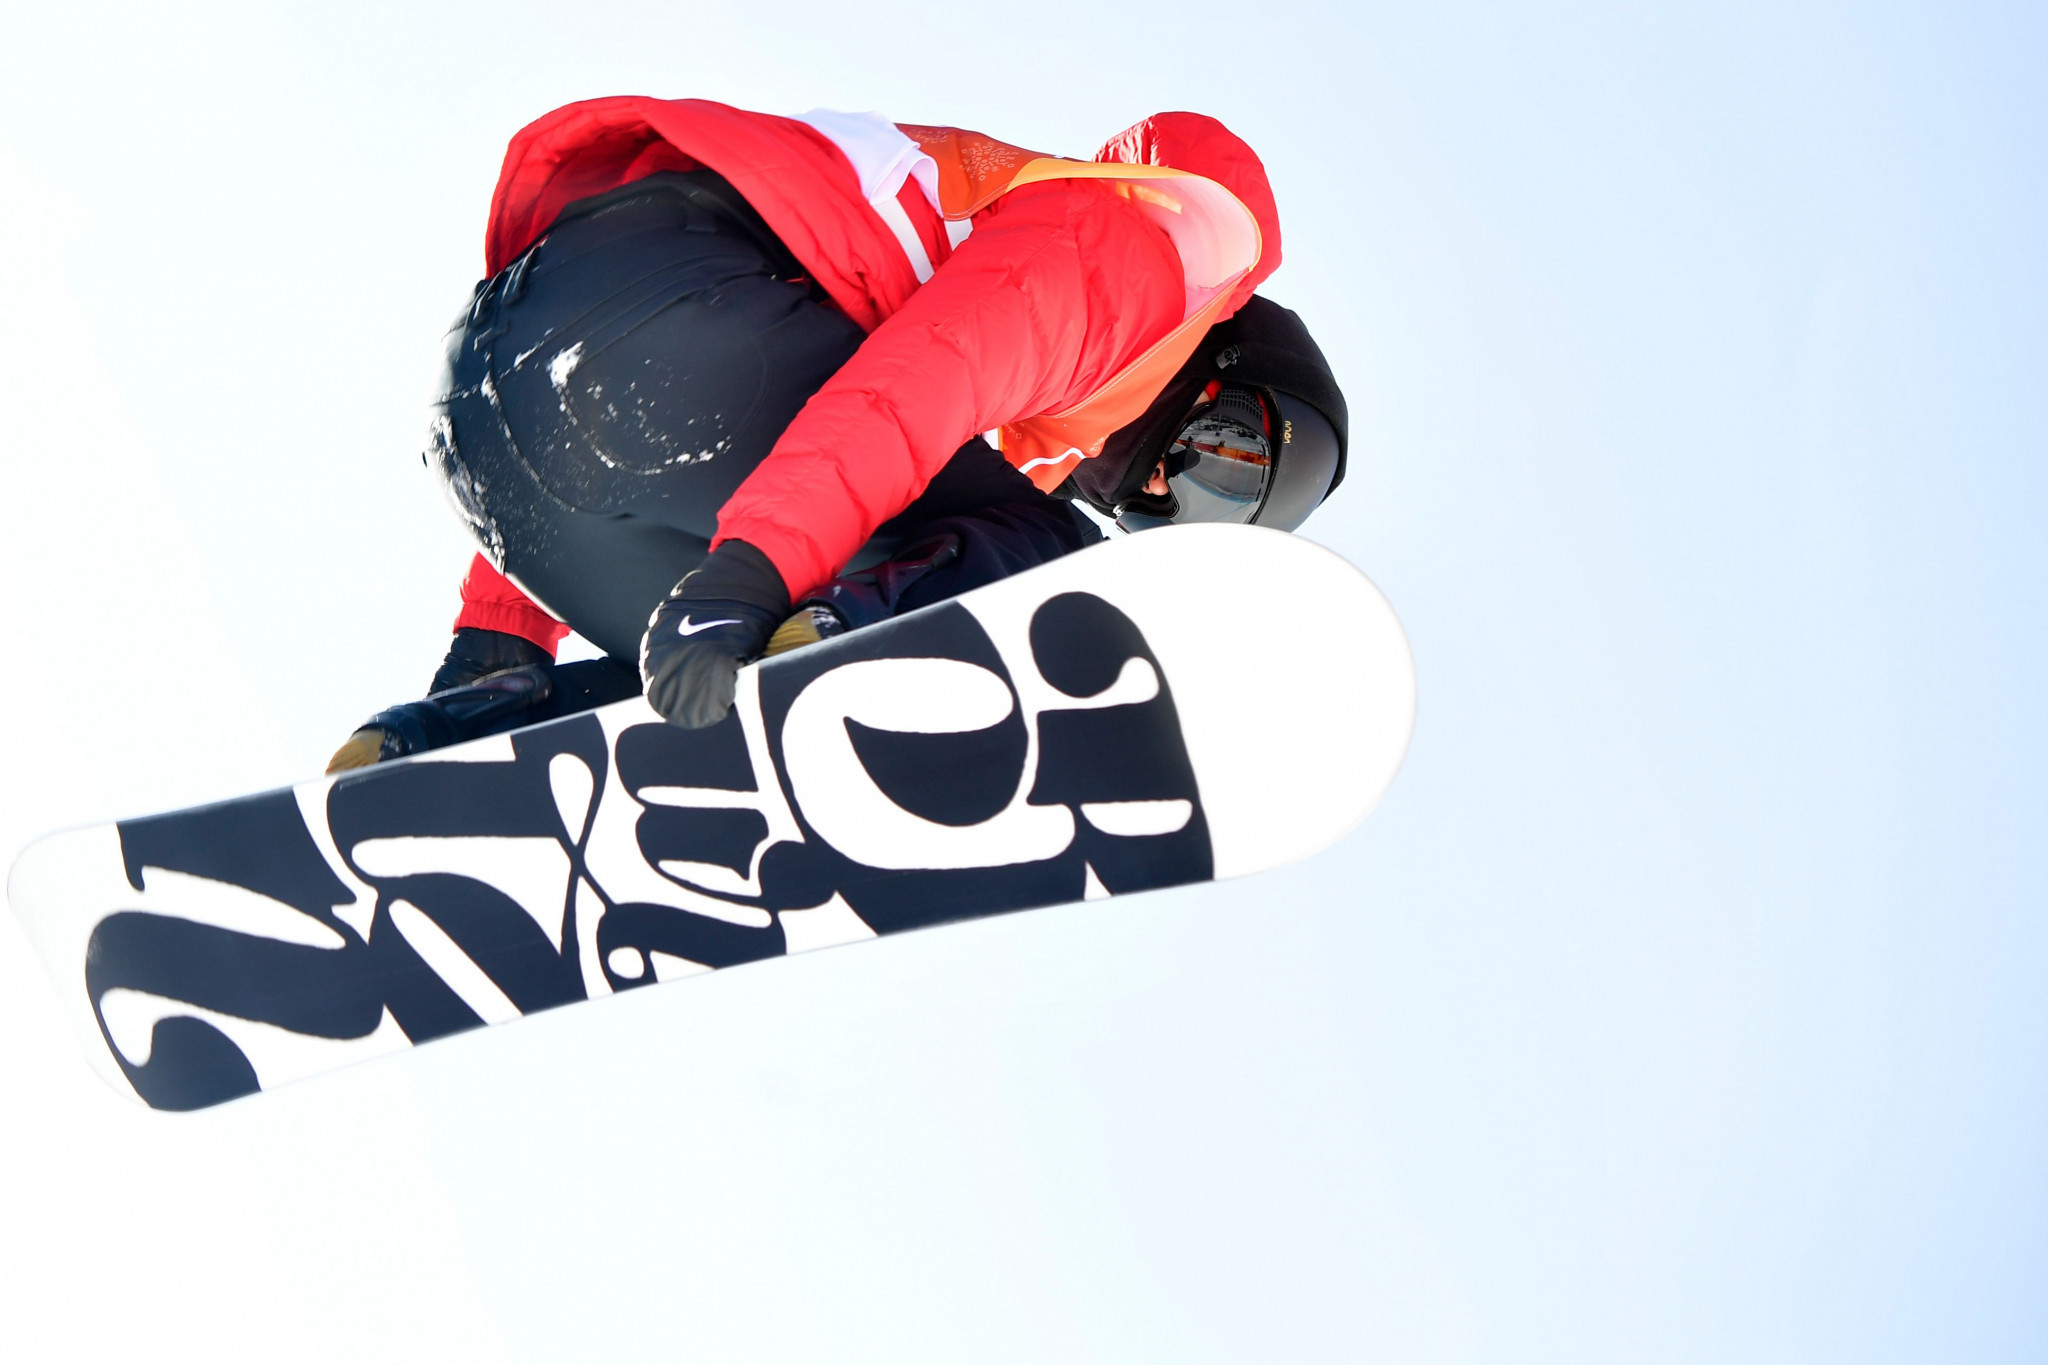 Cai wins Halfpipe World Cup gold on home snow